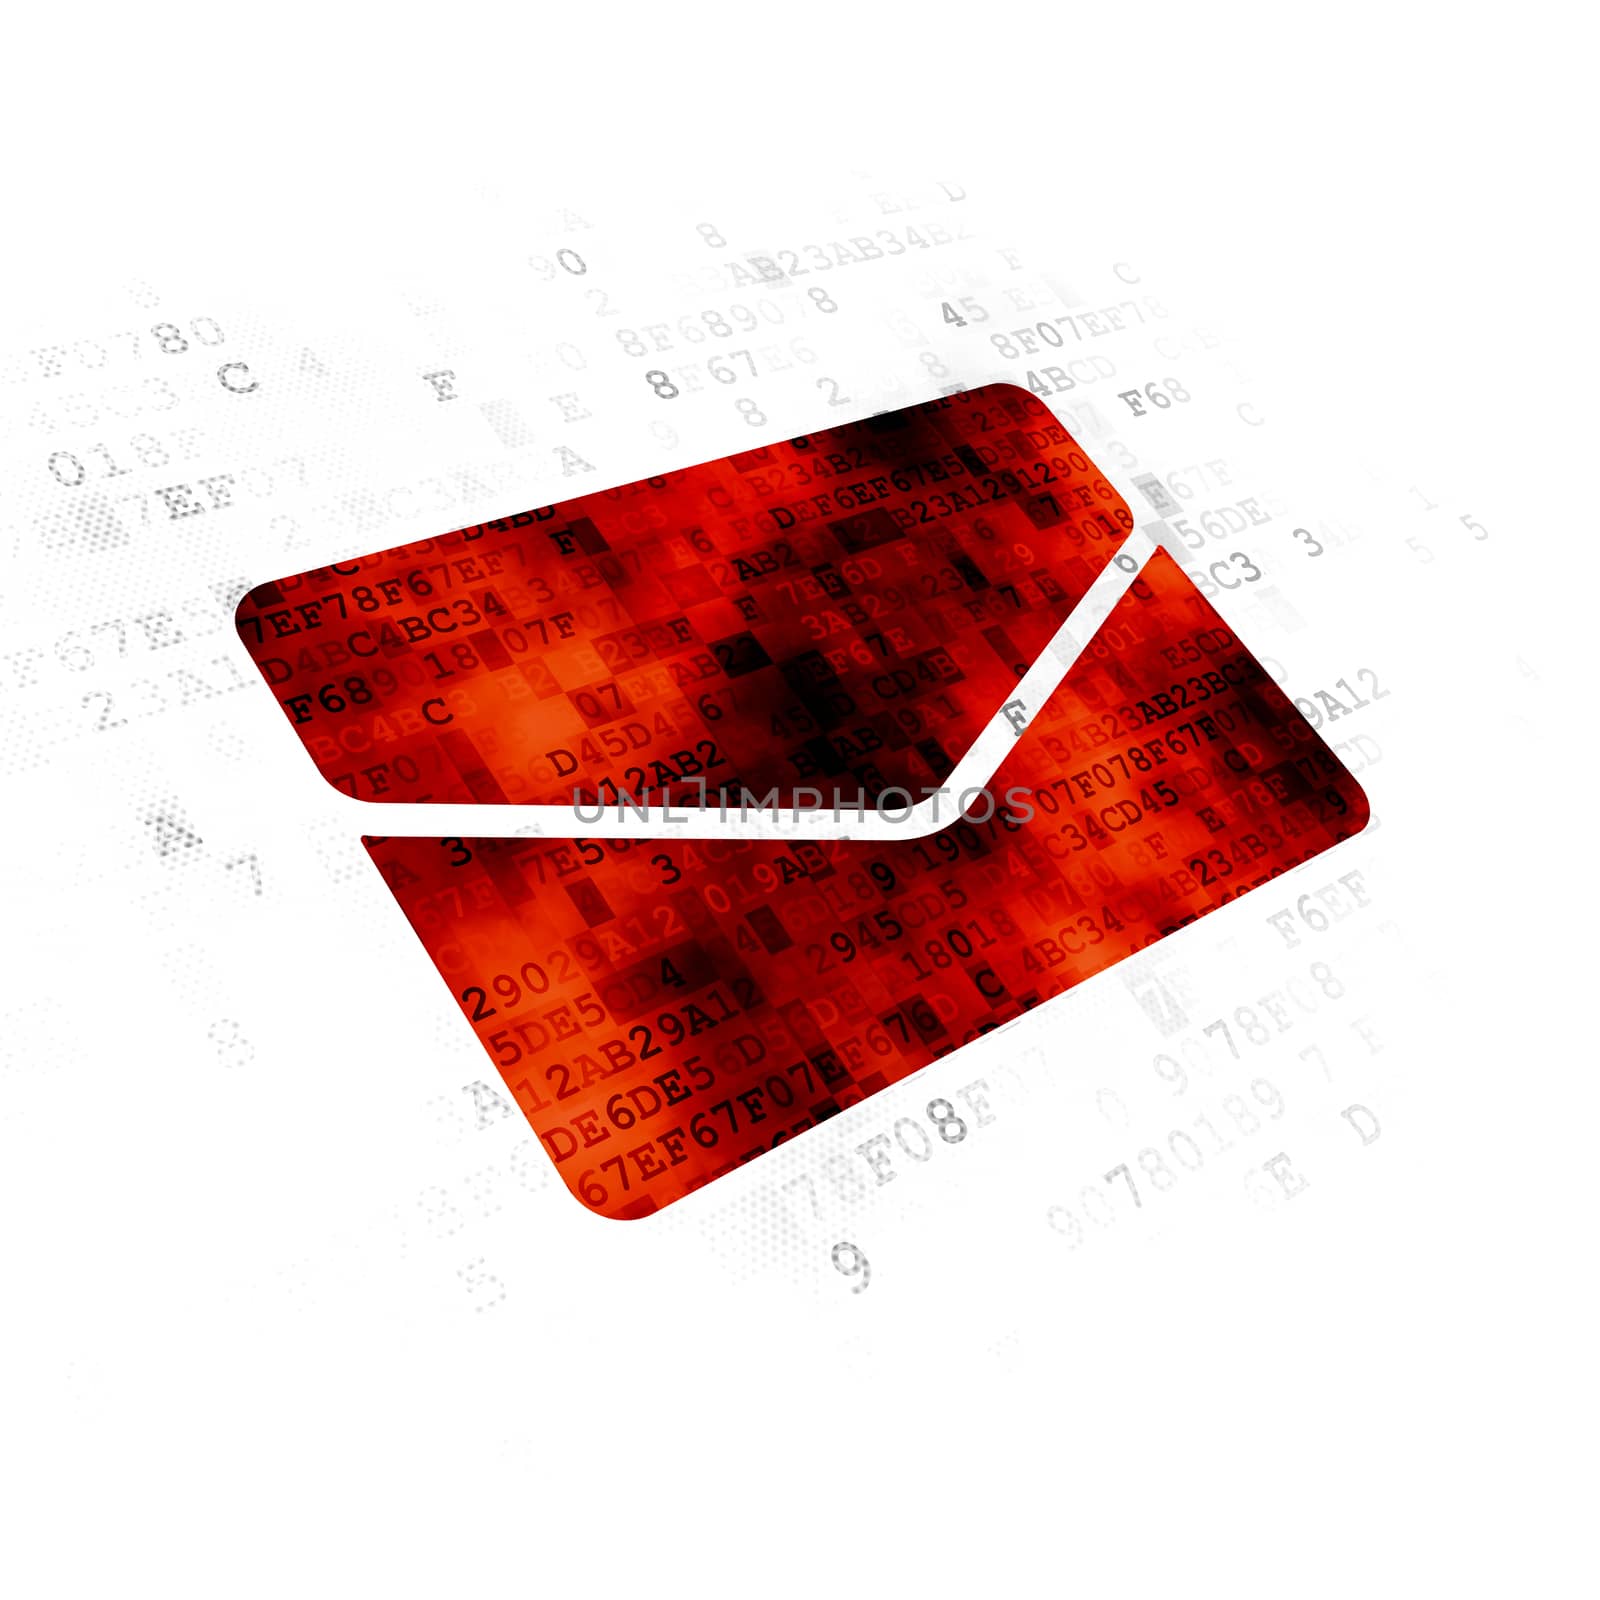 Finance concept: Pixelated red Email icon on Digital background